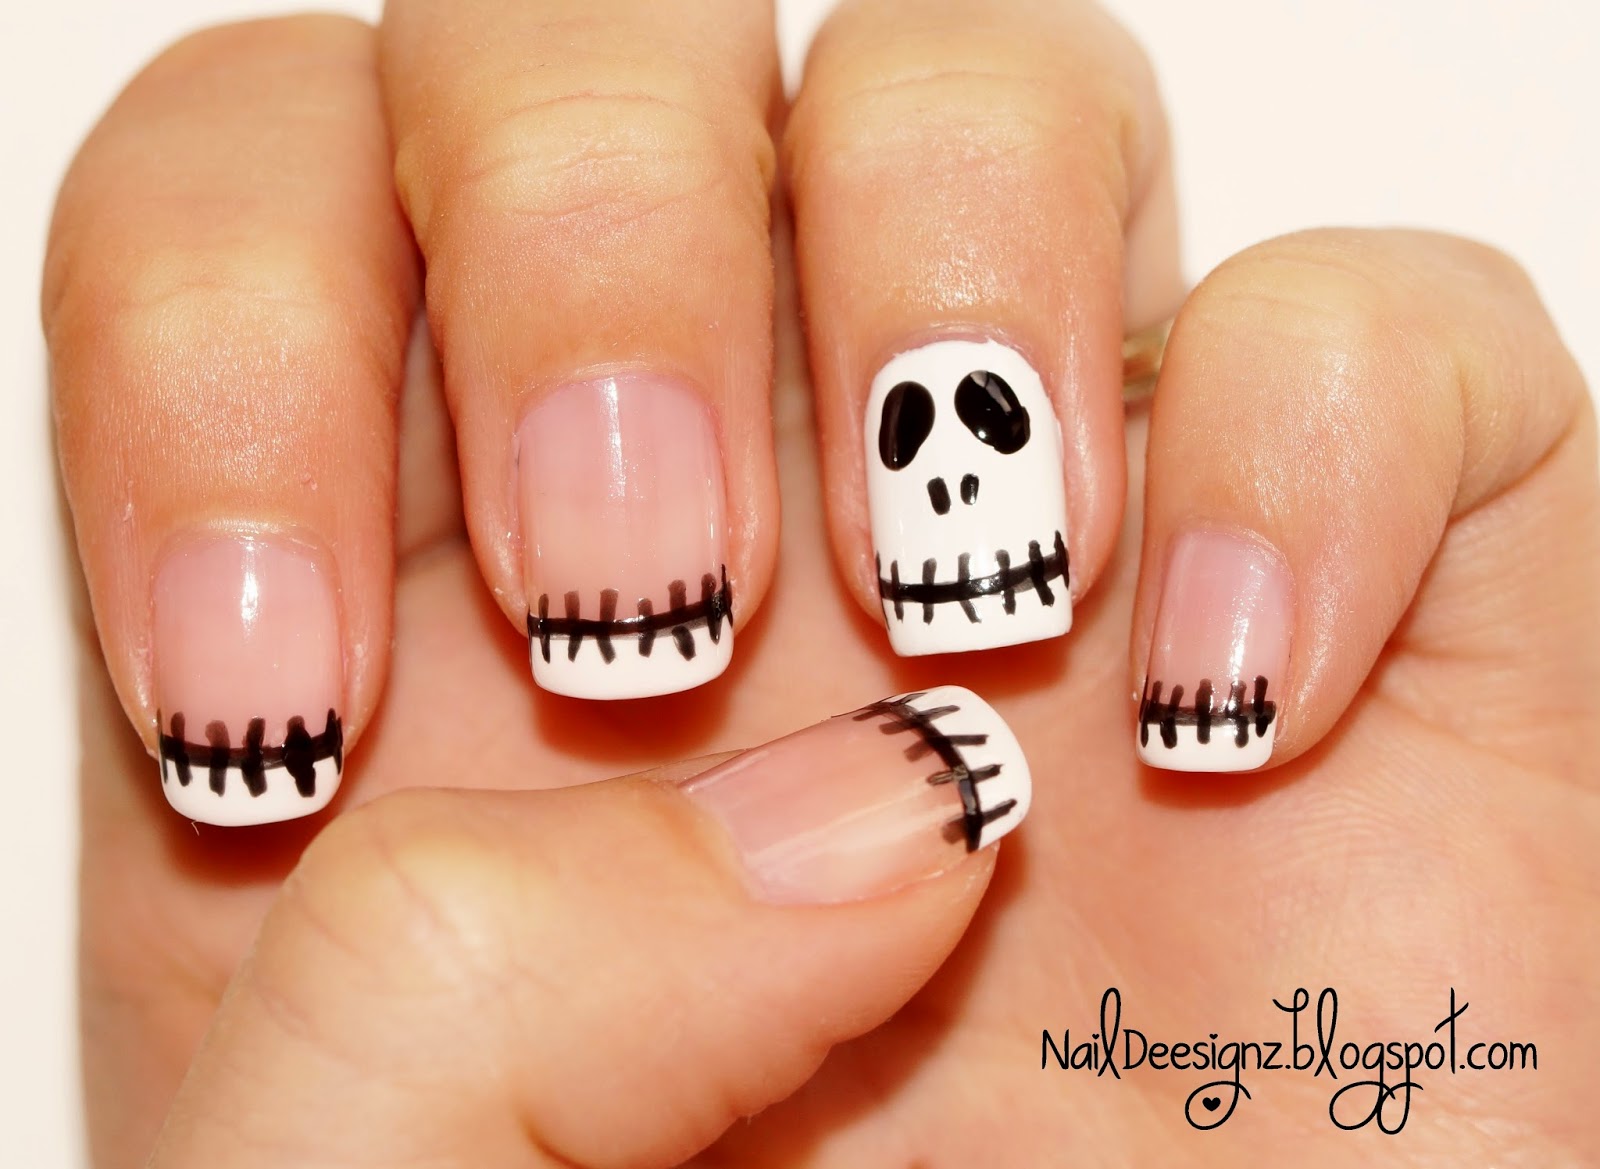 6. Colorful Skeleton Hand Nail Art - wide 1